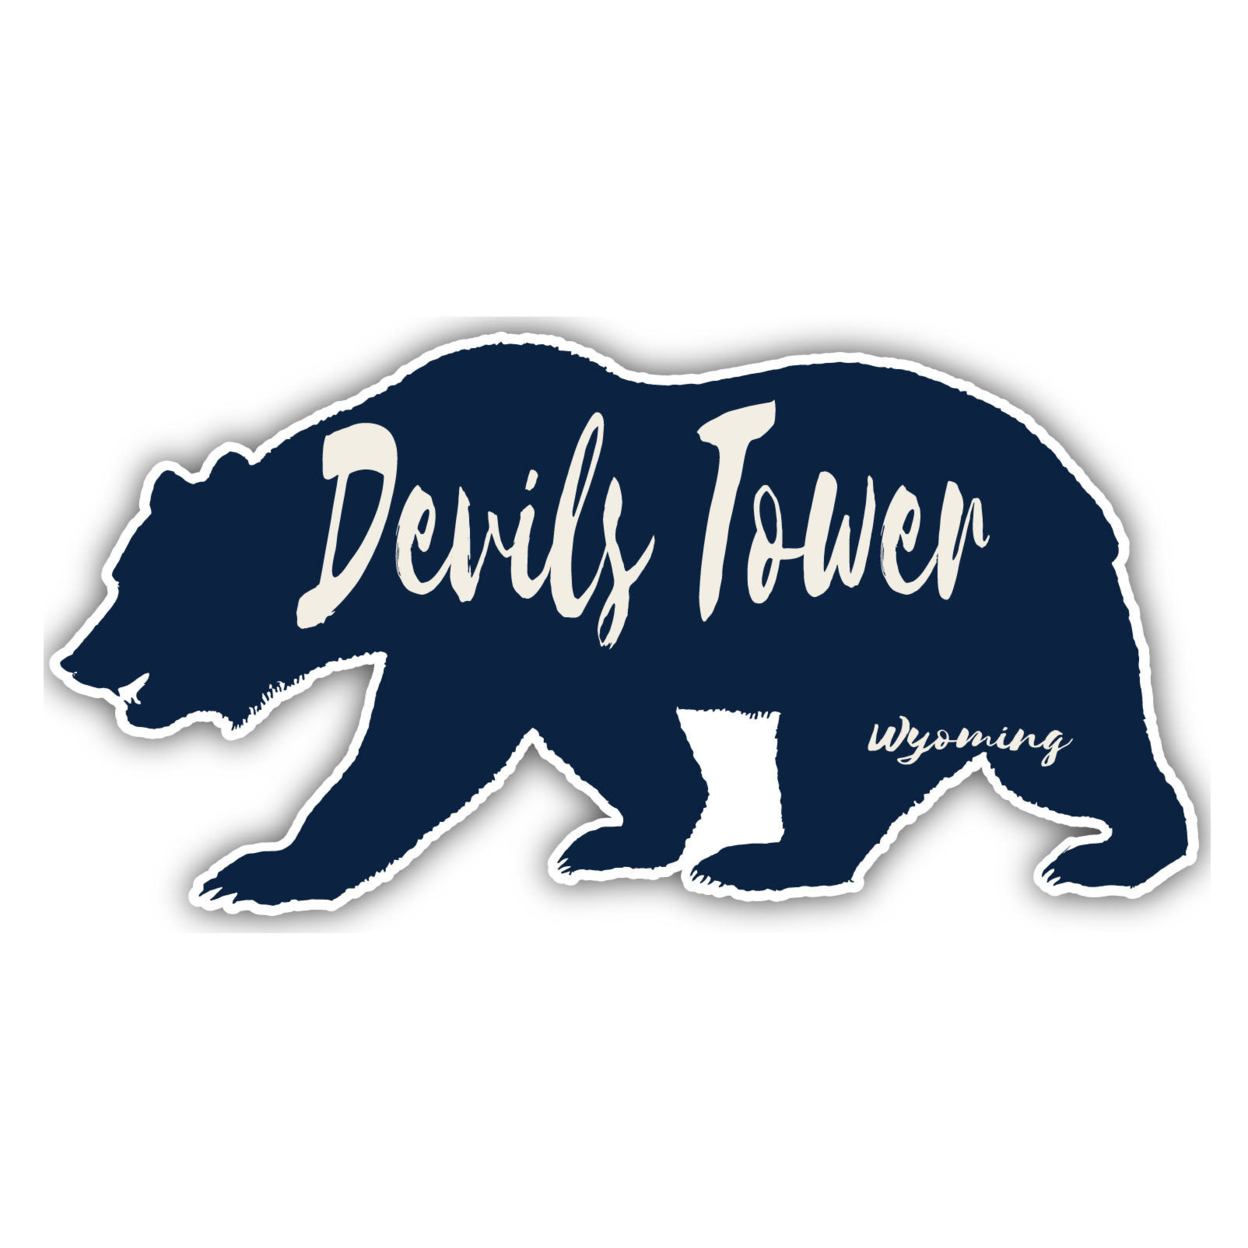 Devils Tower Wyoming Souvenir Decorative Stickers (Choose Theme And Size) - Single Unit, 10-Inch, Tent